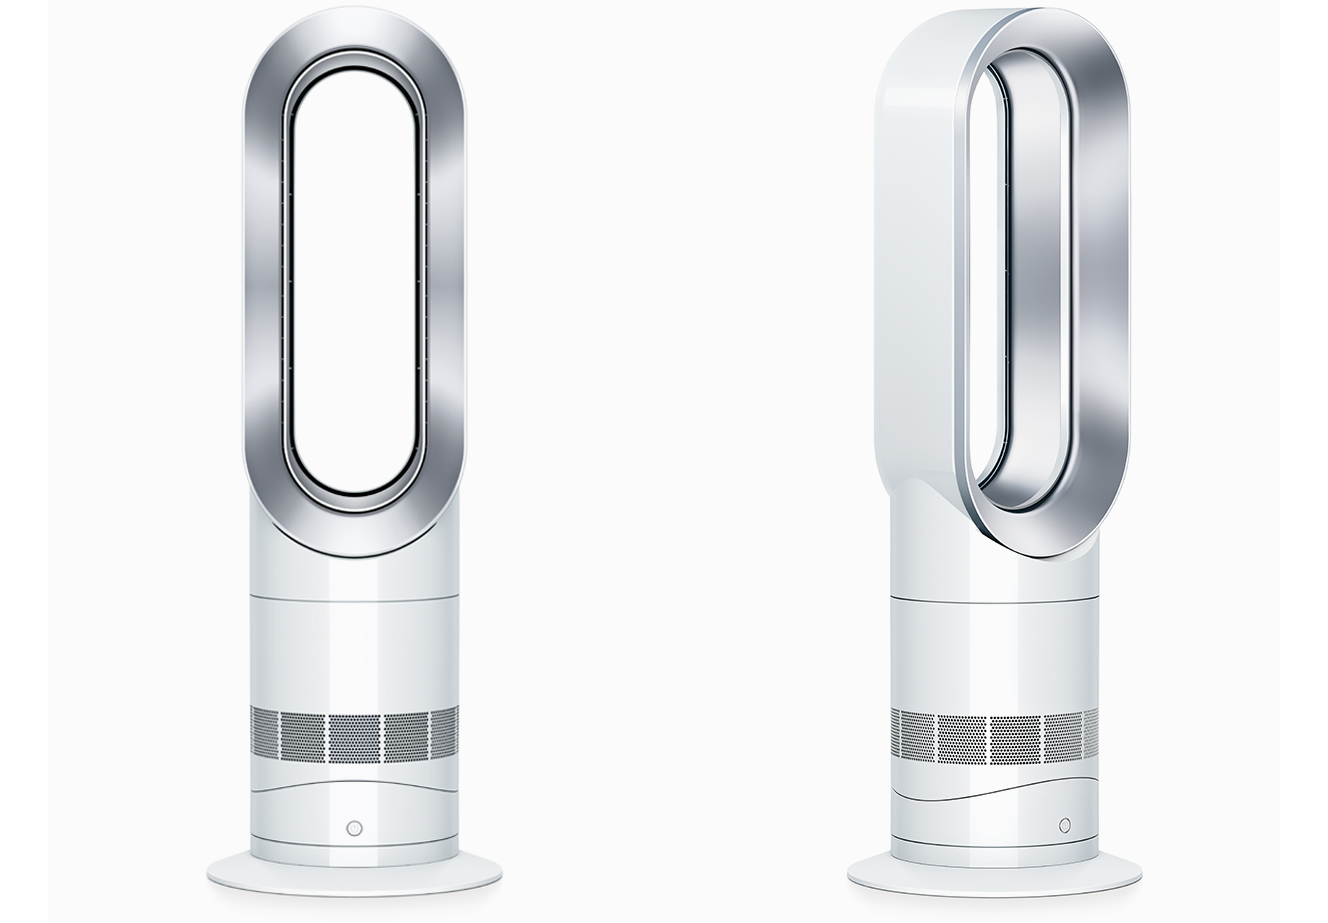 https://dyson-h.assetsadobe2.com/is/image/content/dam/dyson/products/fans-and-heaters/hot-and-cool/pdp/am09-white-nickel/Dyson-Hot-Cool-Jet-Focus-Fan-Heater-Specification.jpg?$responsive$&fmt=png-alpha&cropPathE=mobile&fit=stretch,1&wid=1328